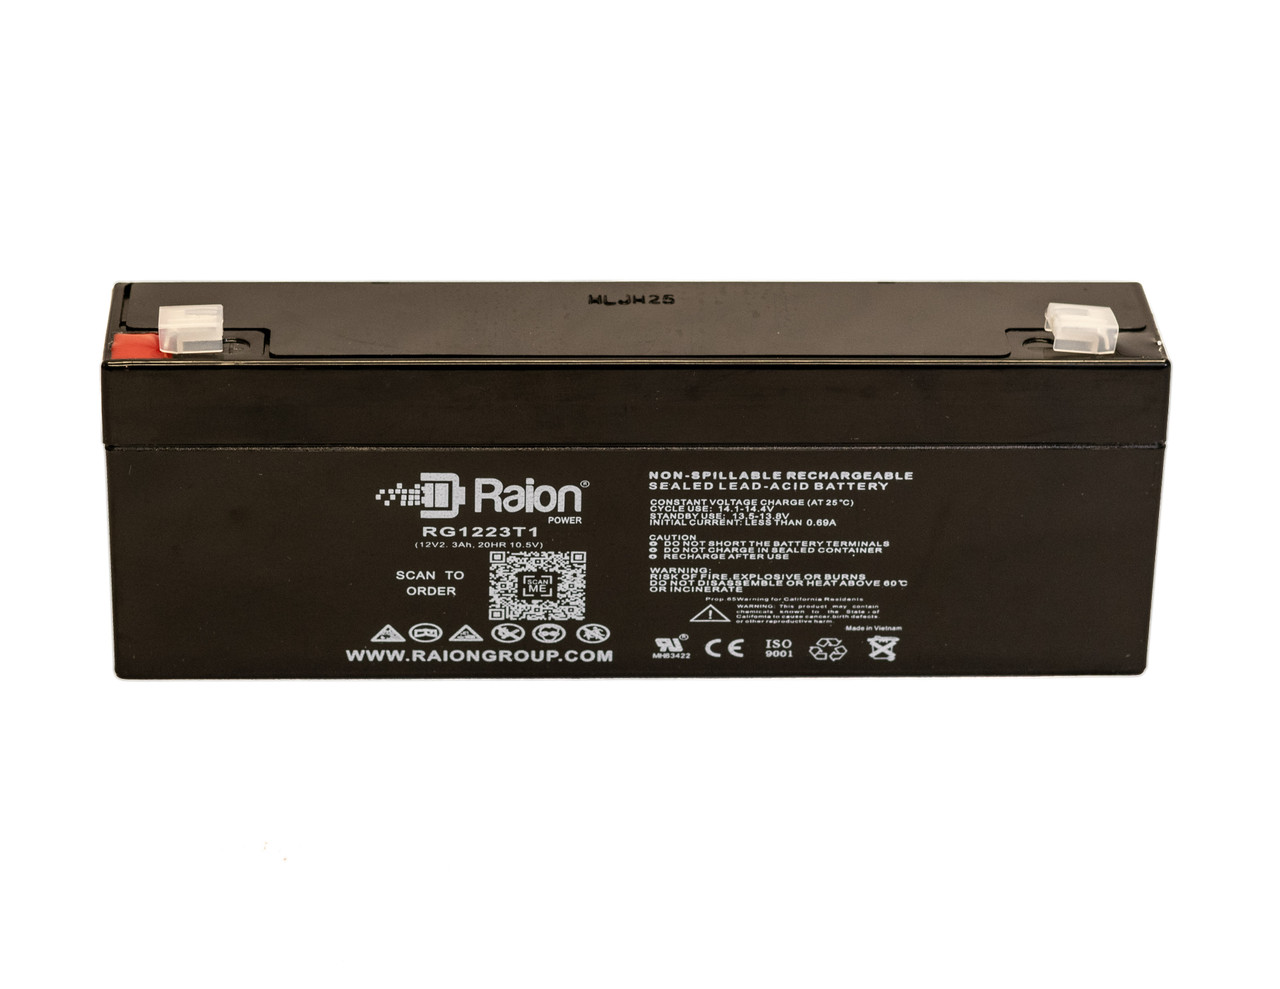 Raion Power 12V 2.3Ah SLA Battery With T1 Terminals For Narco Air Shields N15 Warm Weigh Infant Scale